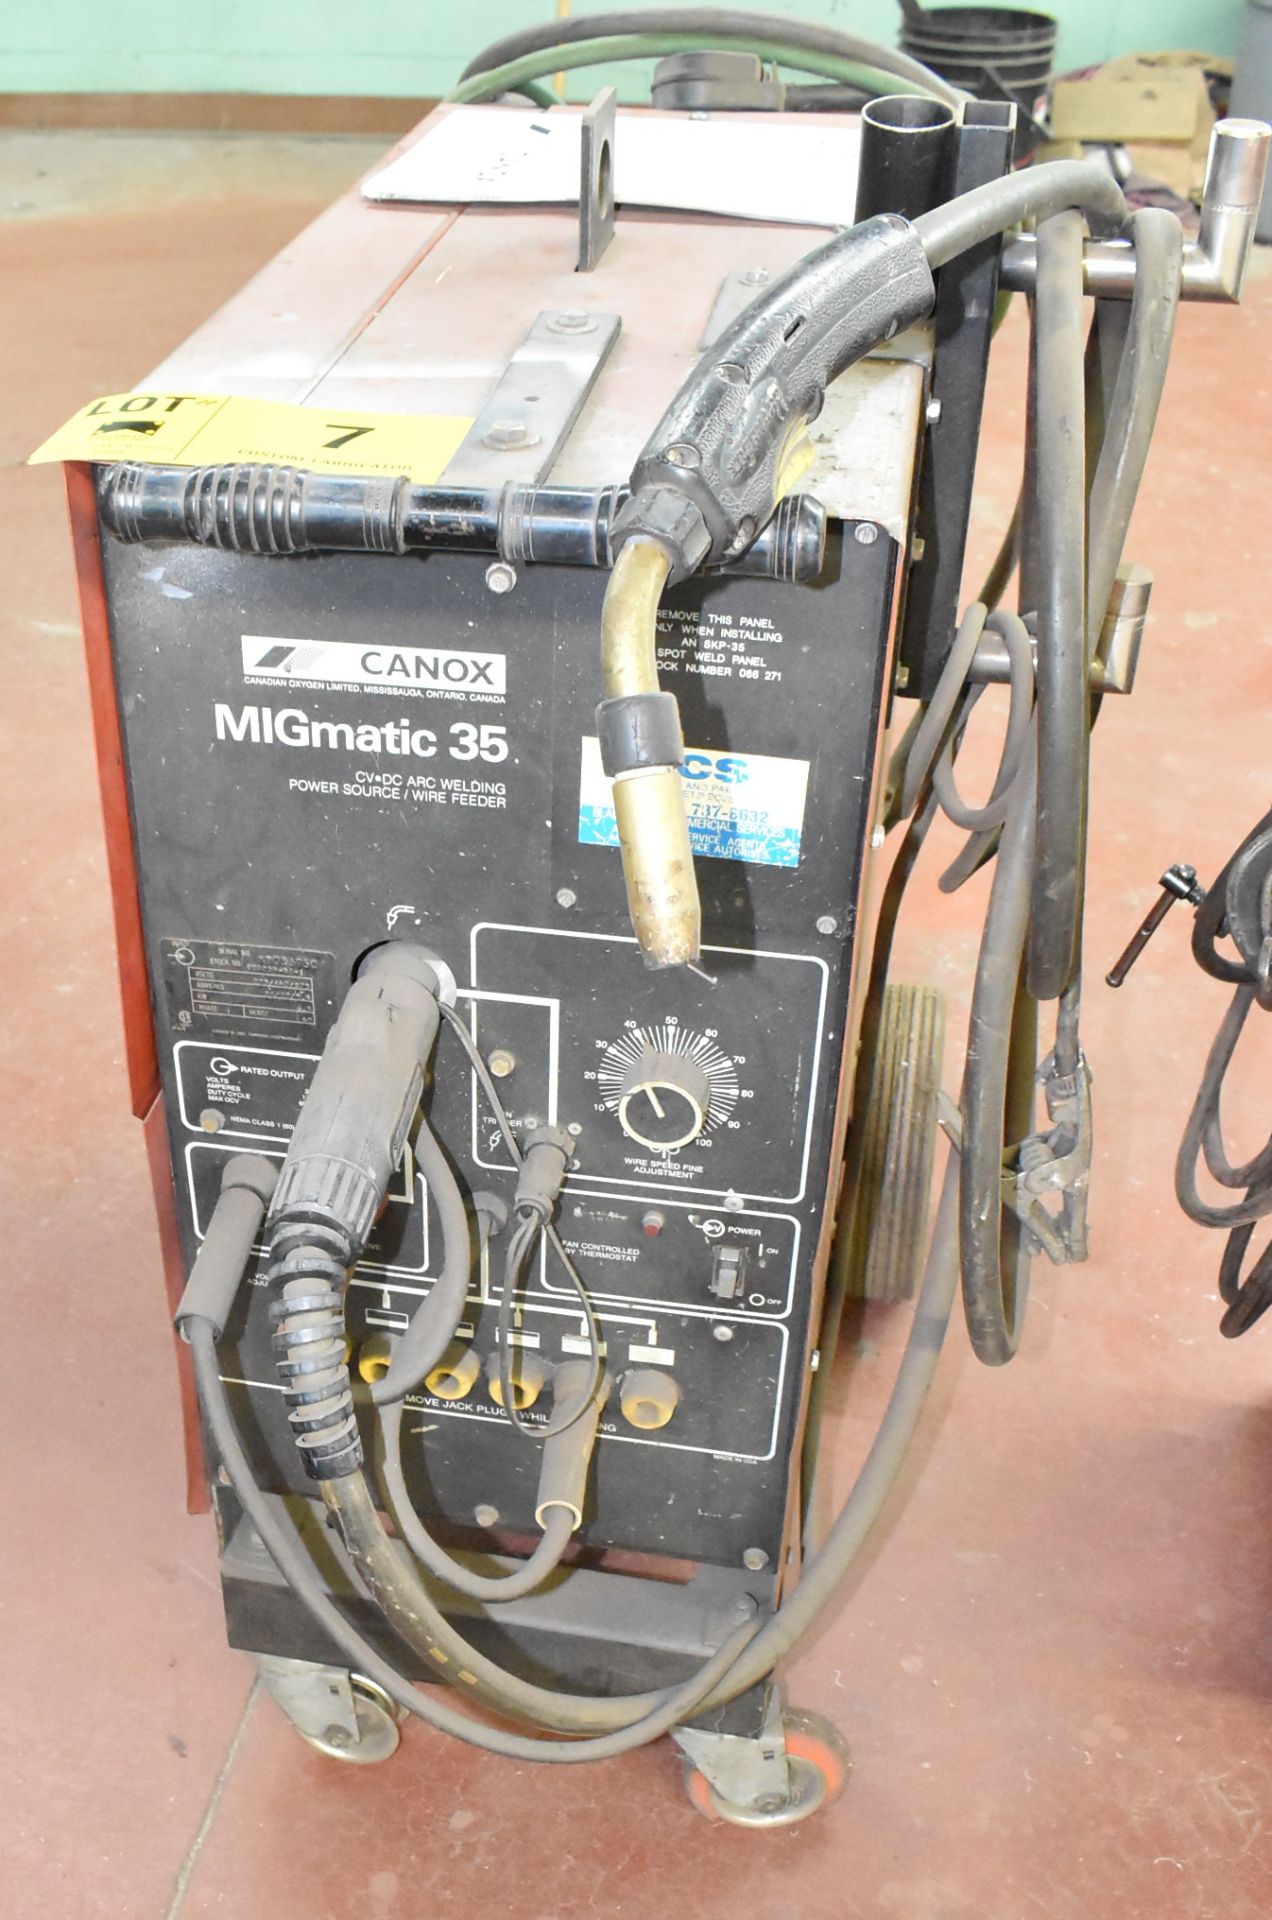 CANNOX MIGMATIC 35 portable MIG welder with cables & gun, s/n: KB036950 [RIGGING FEE FOR LOT #7 - $